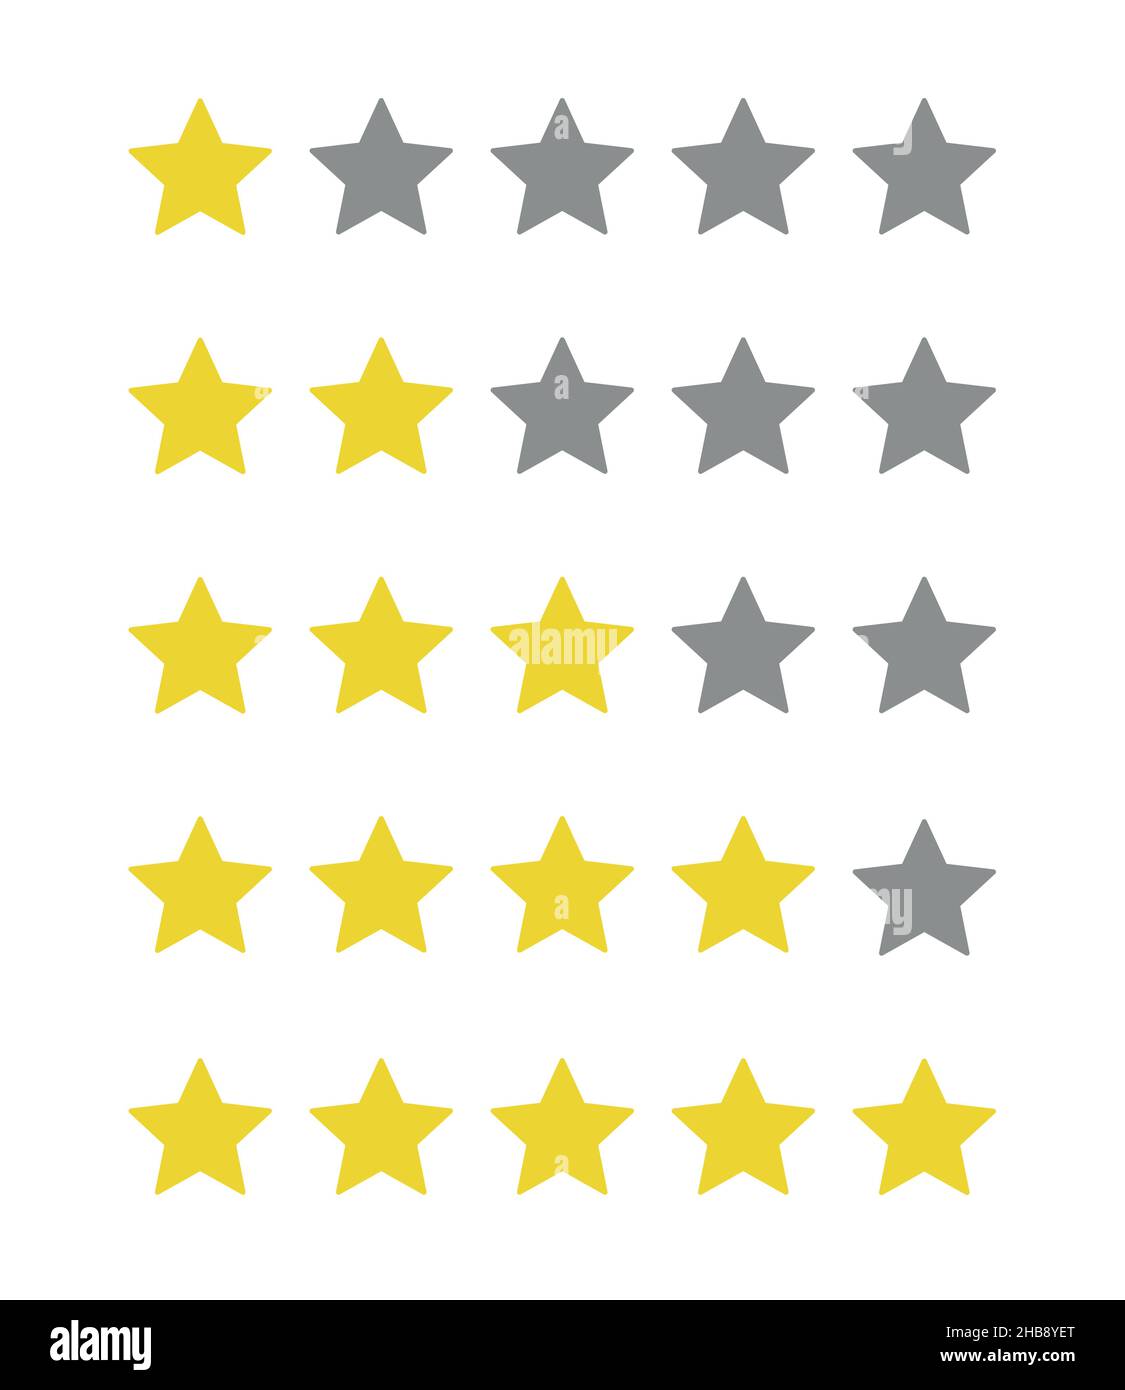 5 star rating icon vector illustration eps10. Isolated badge for website or app, stock Stock Vector